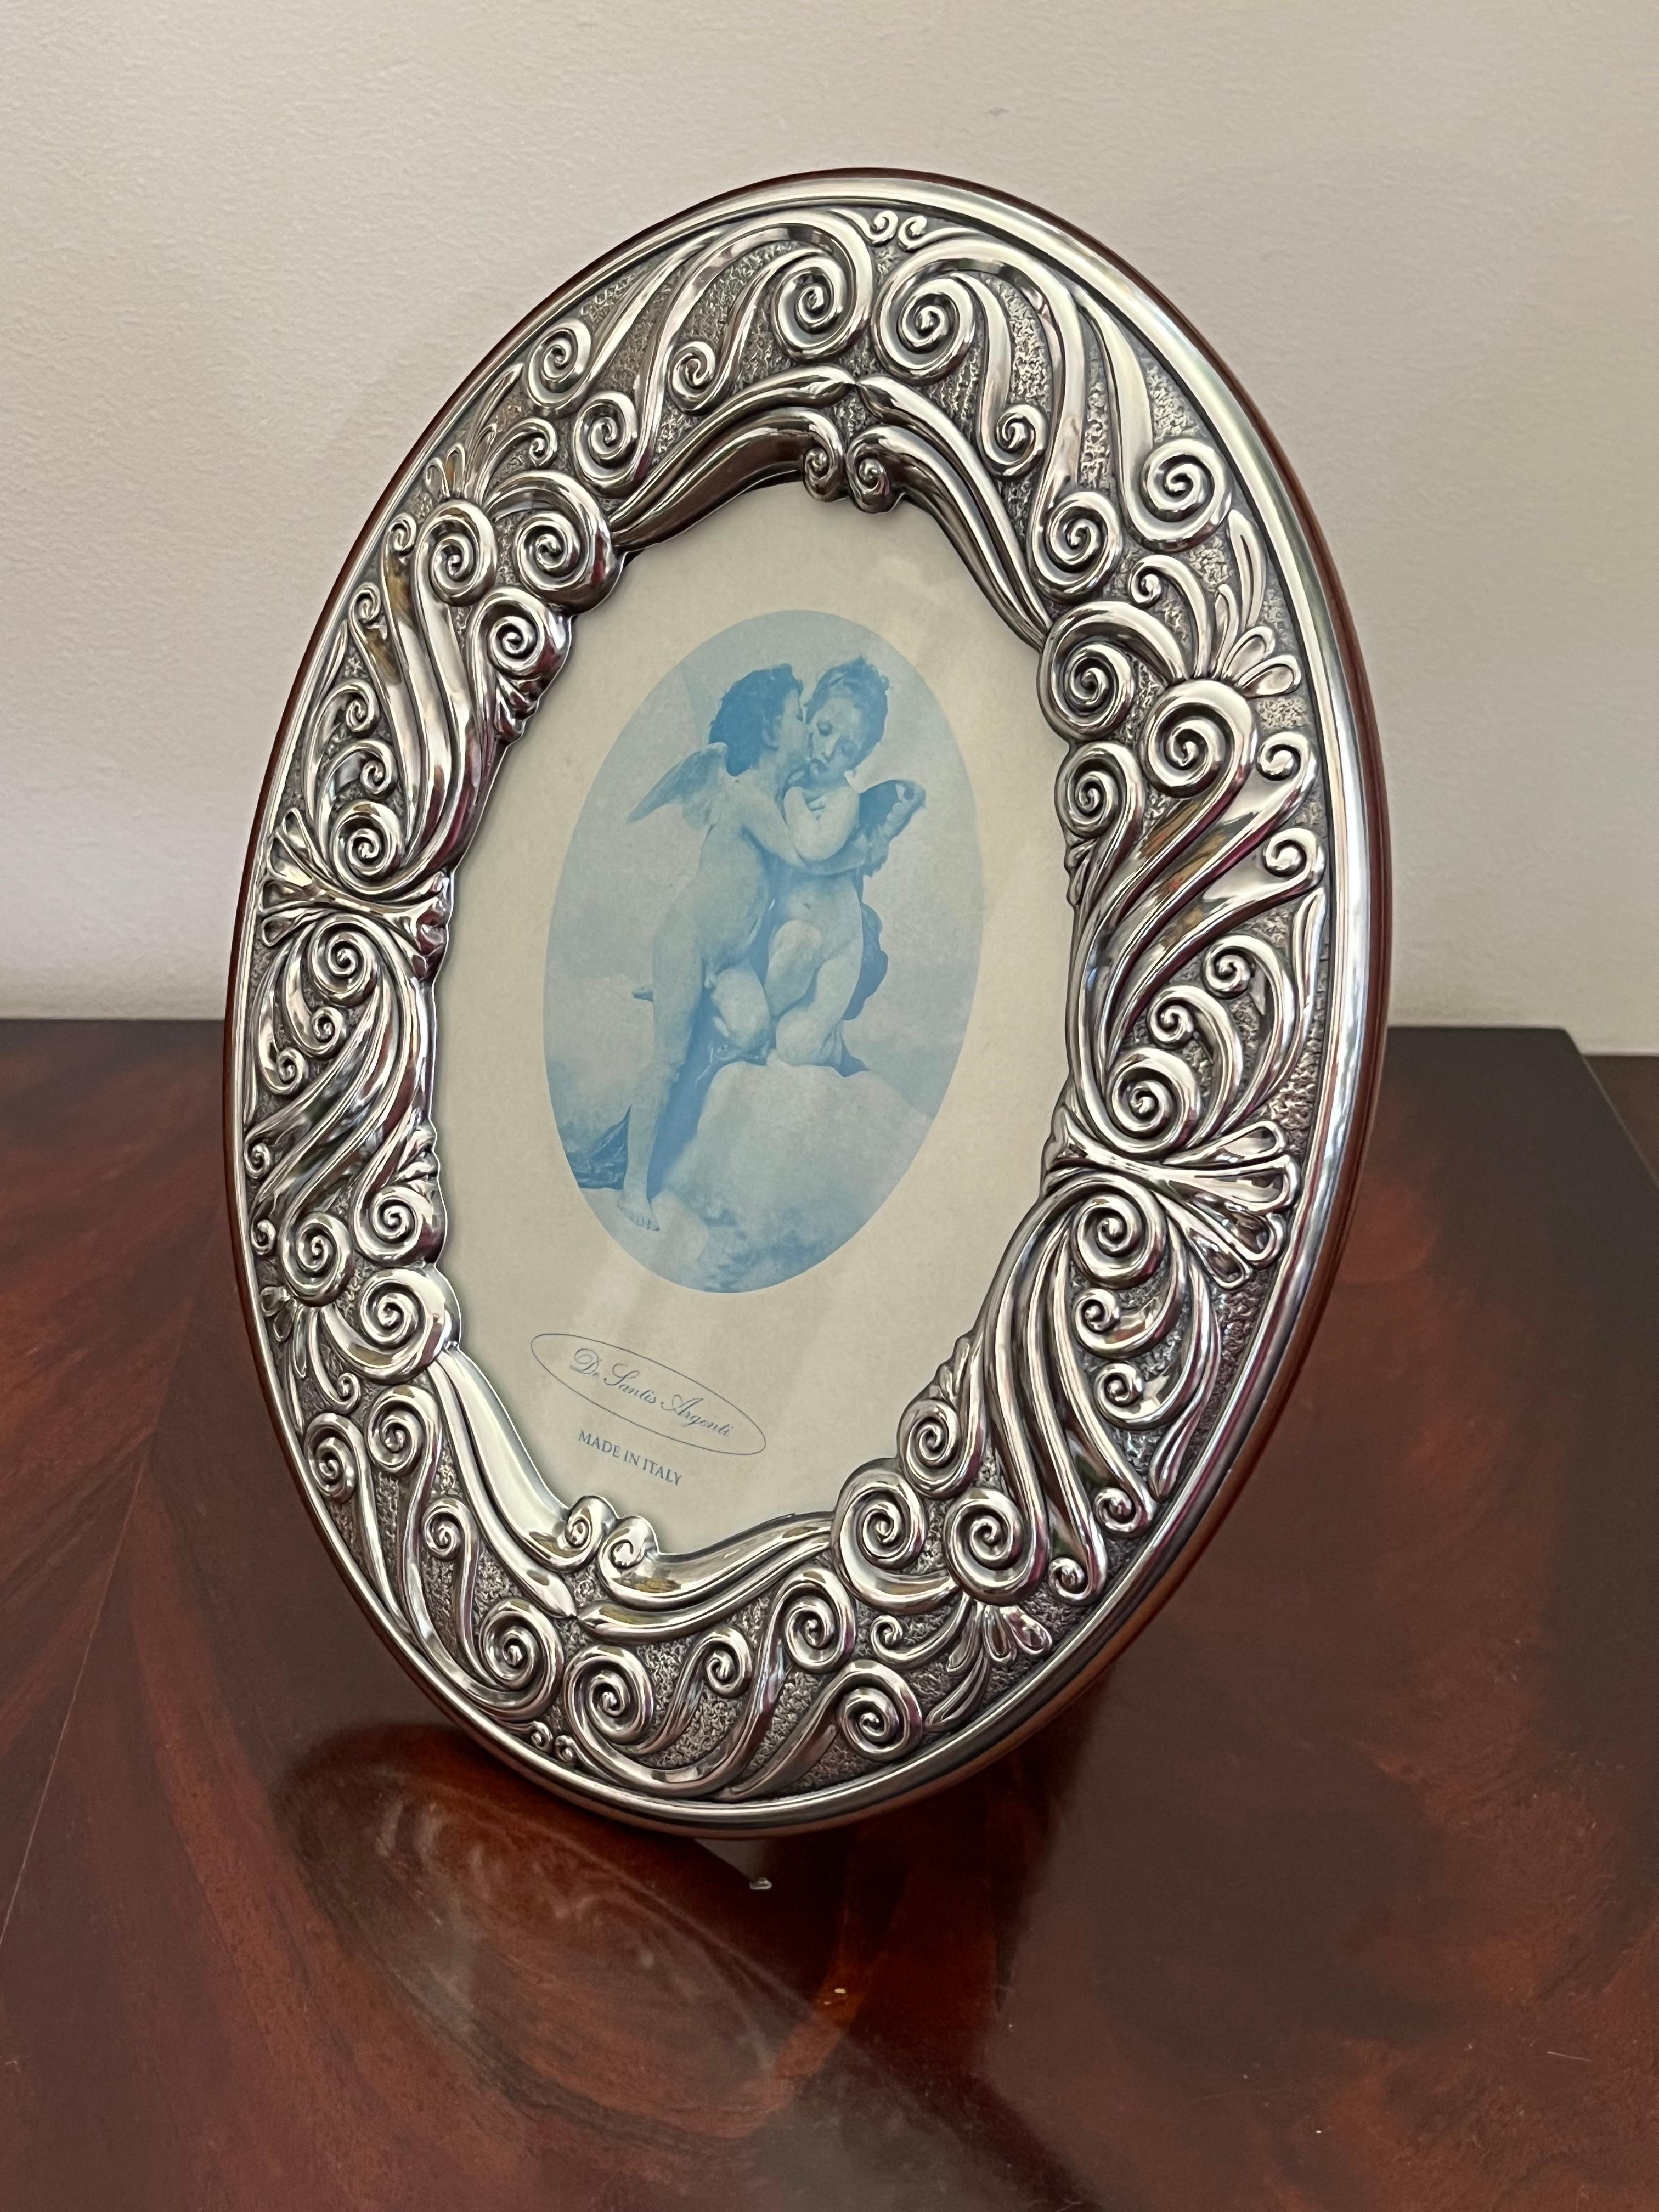 Oval silver photo frame, Italy, 1980s
It belonged to my grandparents and is in excellent condition.